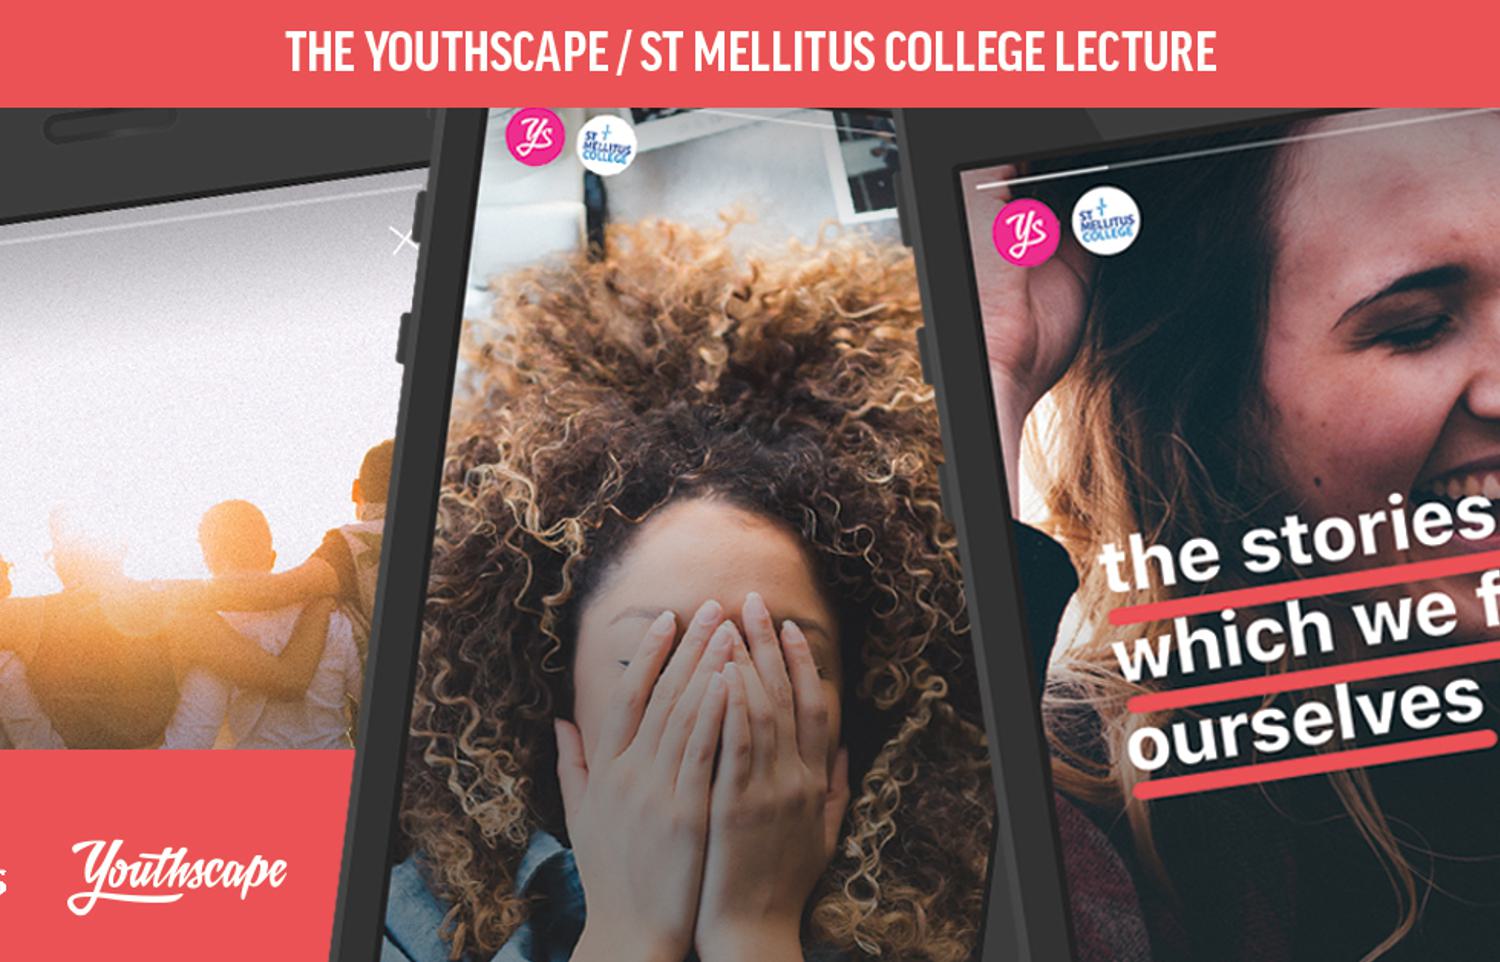 Audio Download of Youthscape / St Mellitus College Lecture 2018